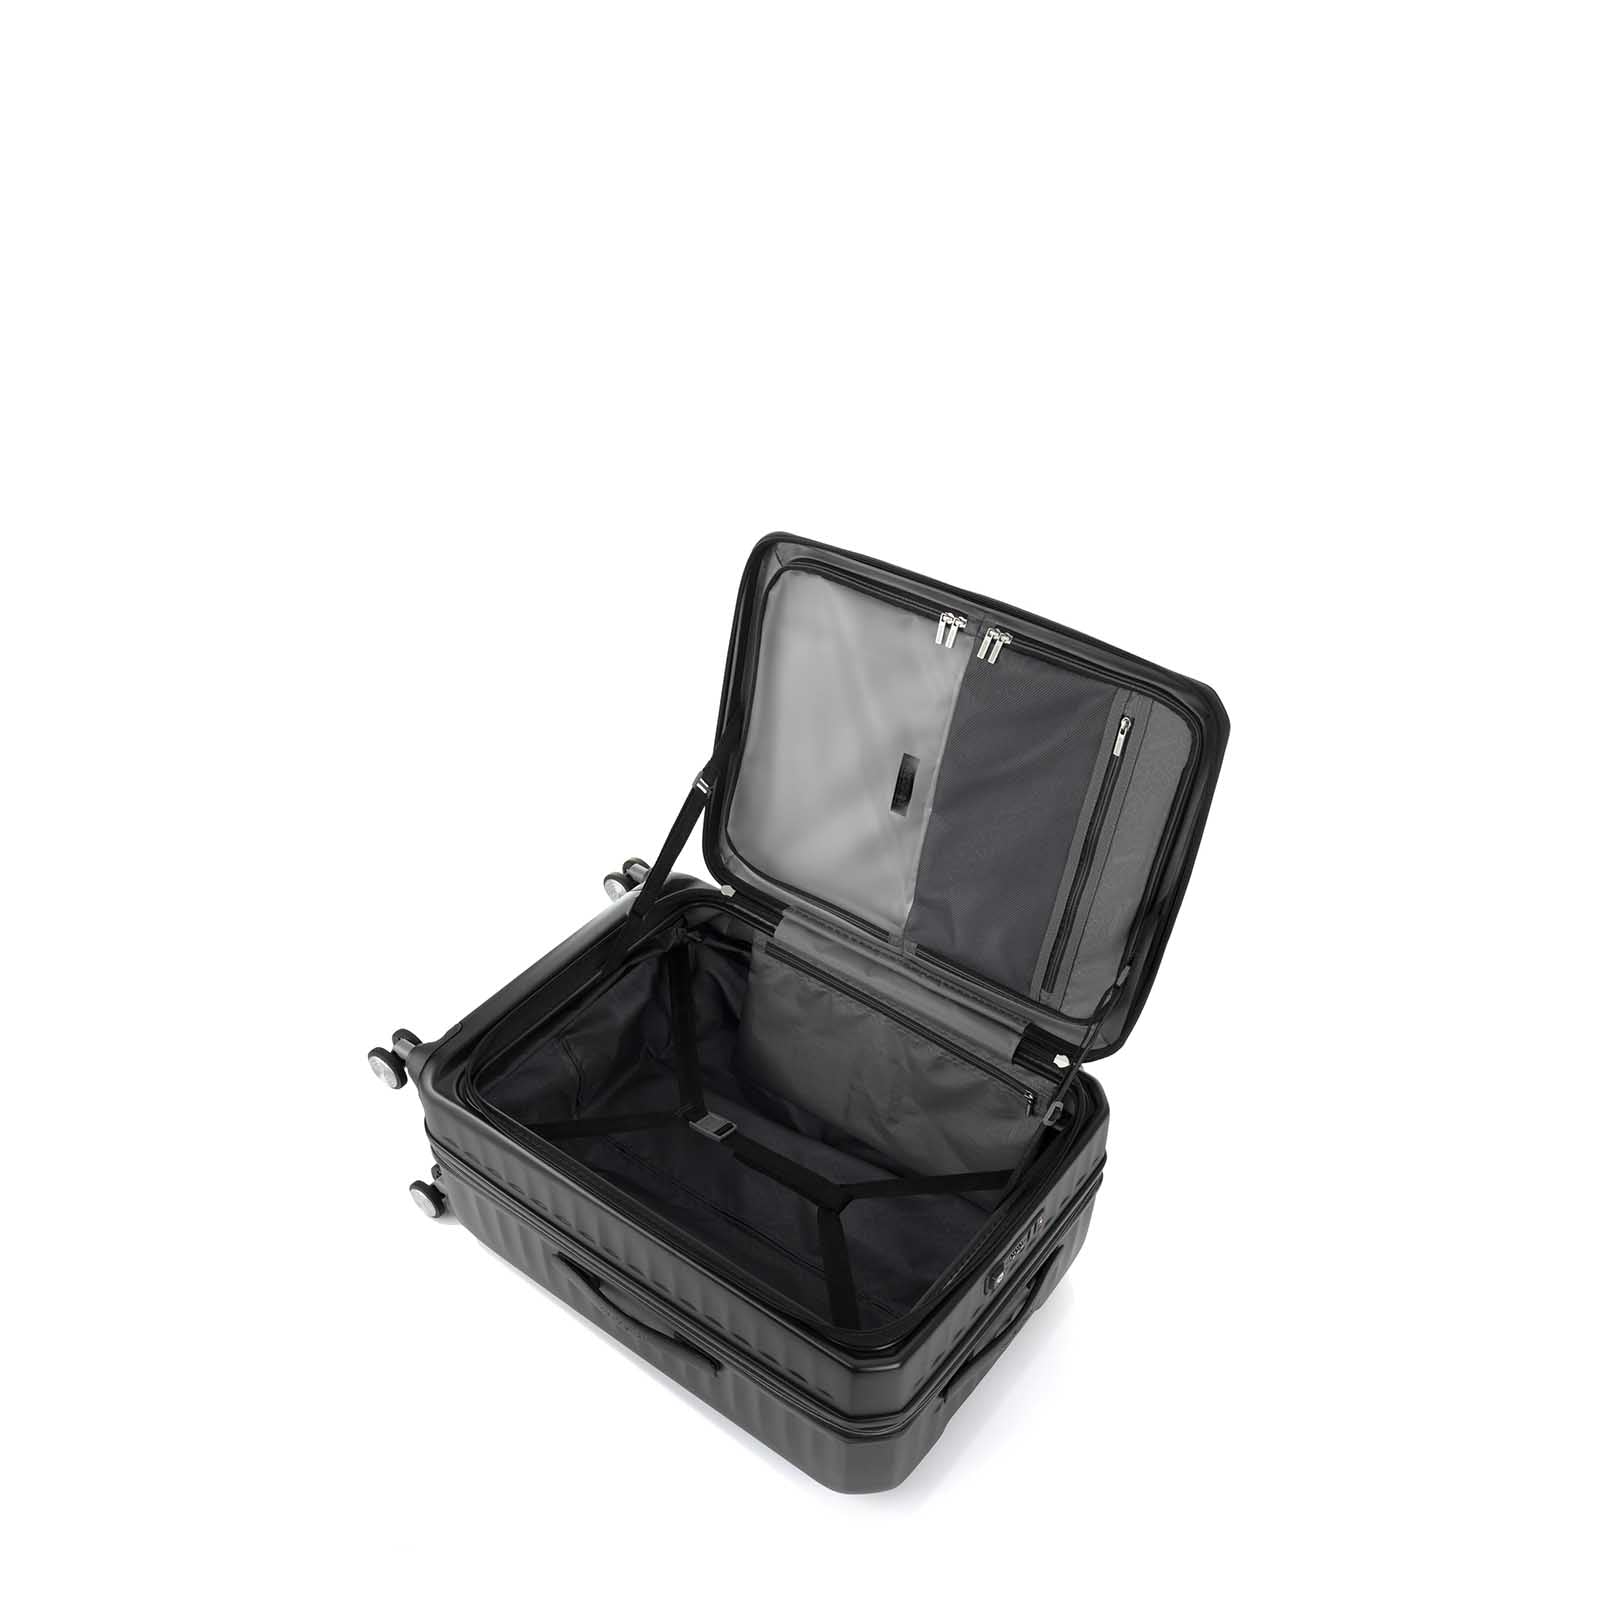 American-Tourister-Frontec-79cm-Suitcase-Jet-Black-Opening